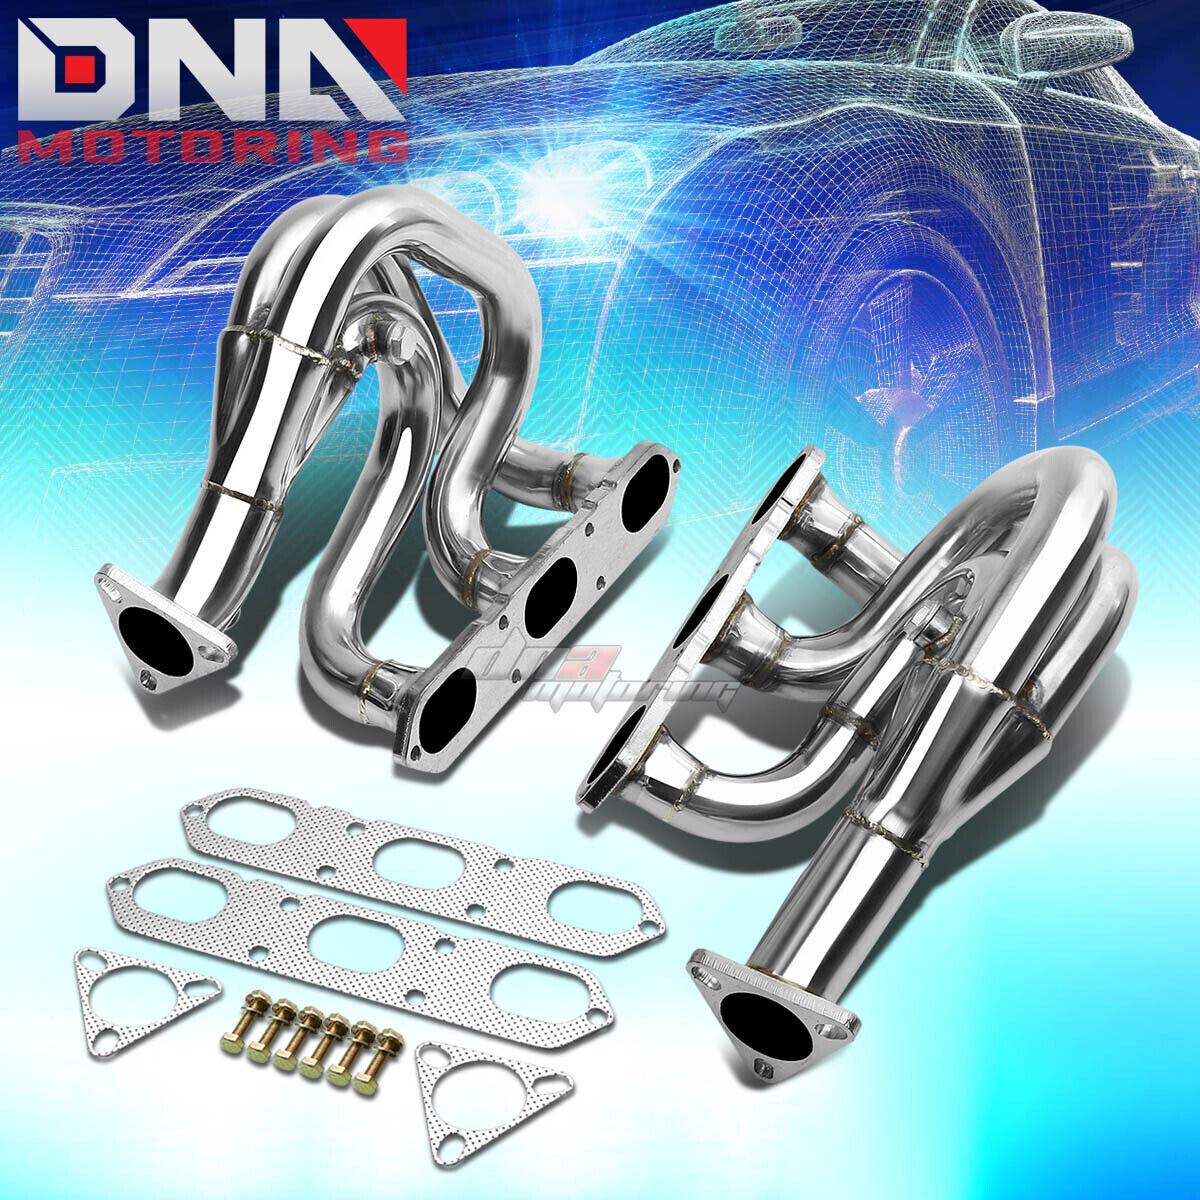 STAINLESS STEEL RACING HEADER FOR 97-04 PORSCHE 986 BOXSTER M96 EXHAUST/MANIFOLD